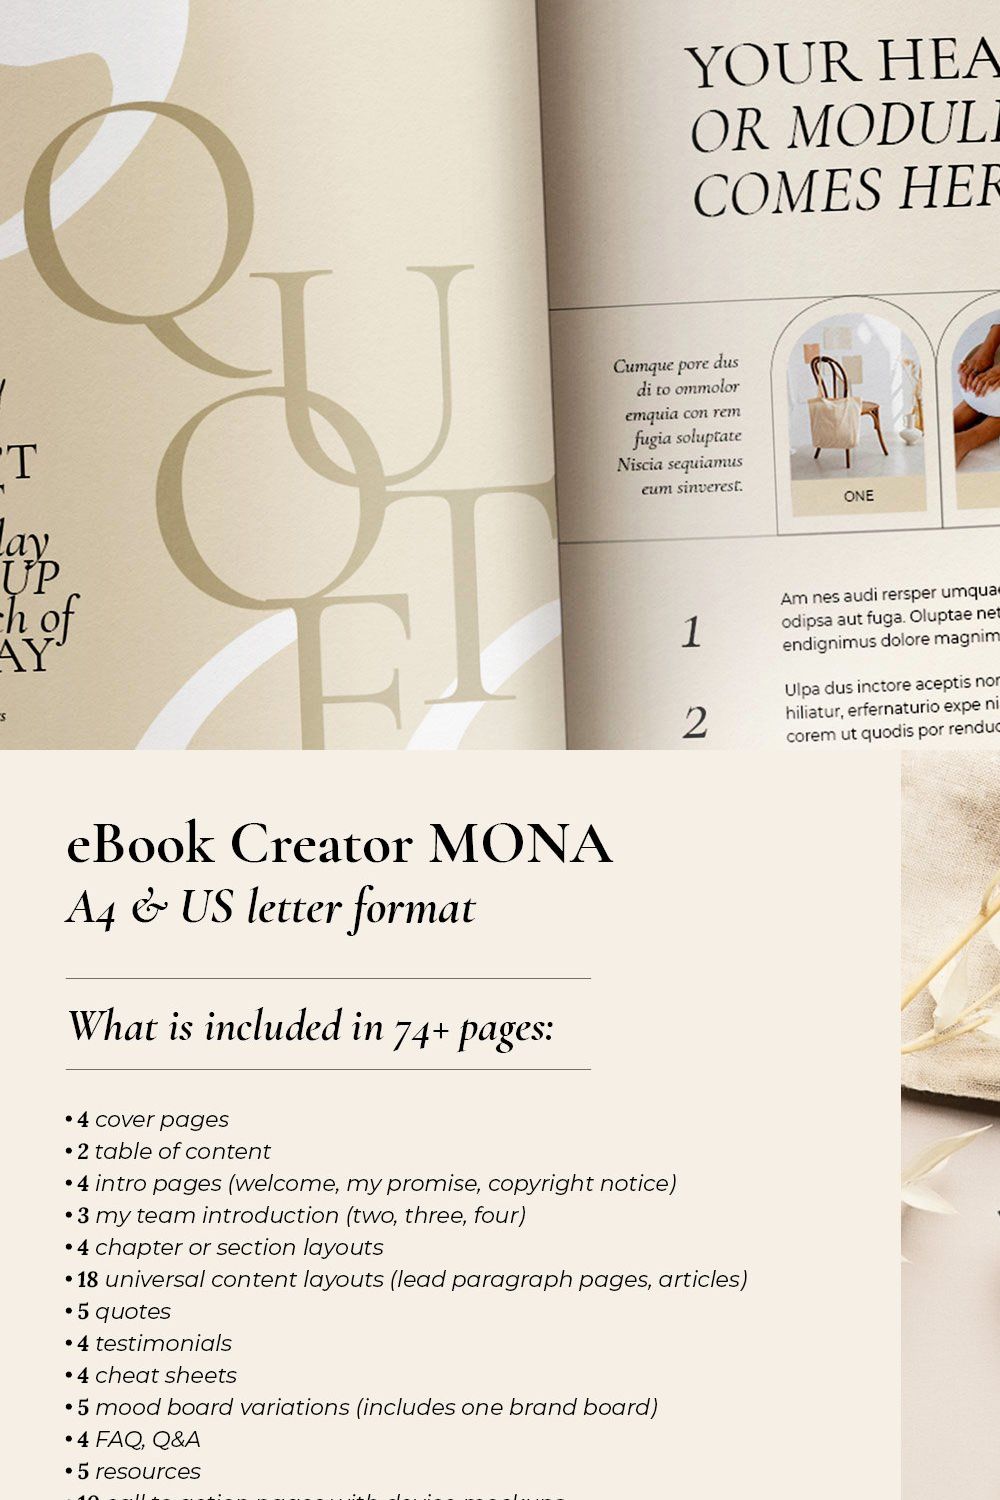 eBook for Coach / CANVA, INDD / Mona pinterest preview image.